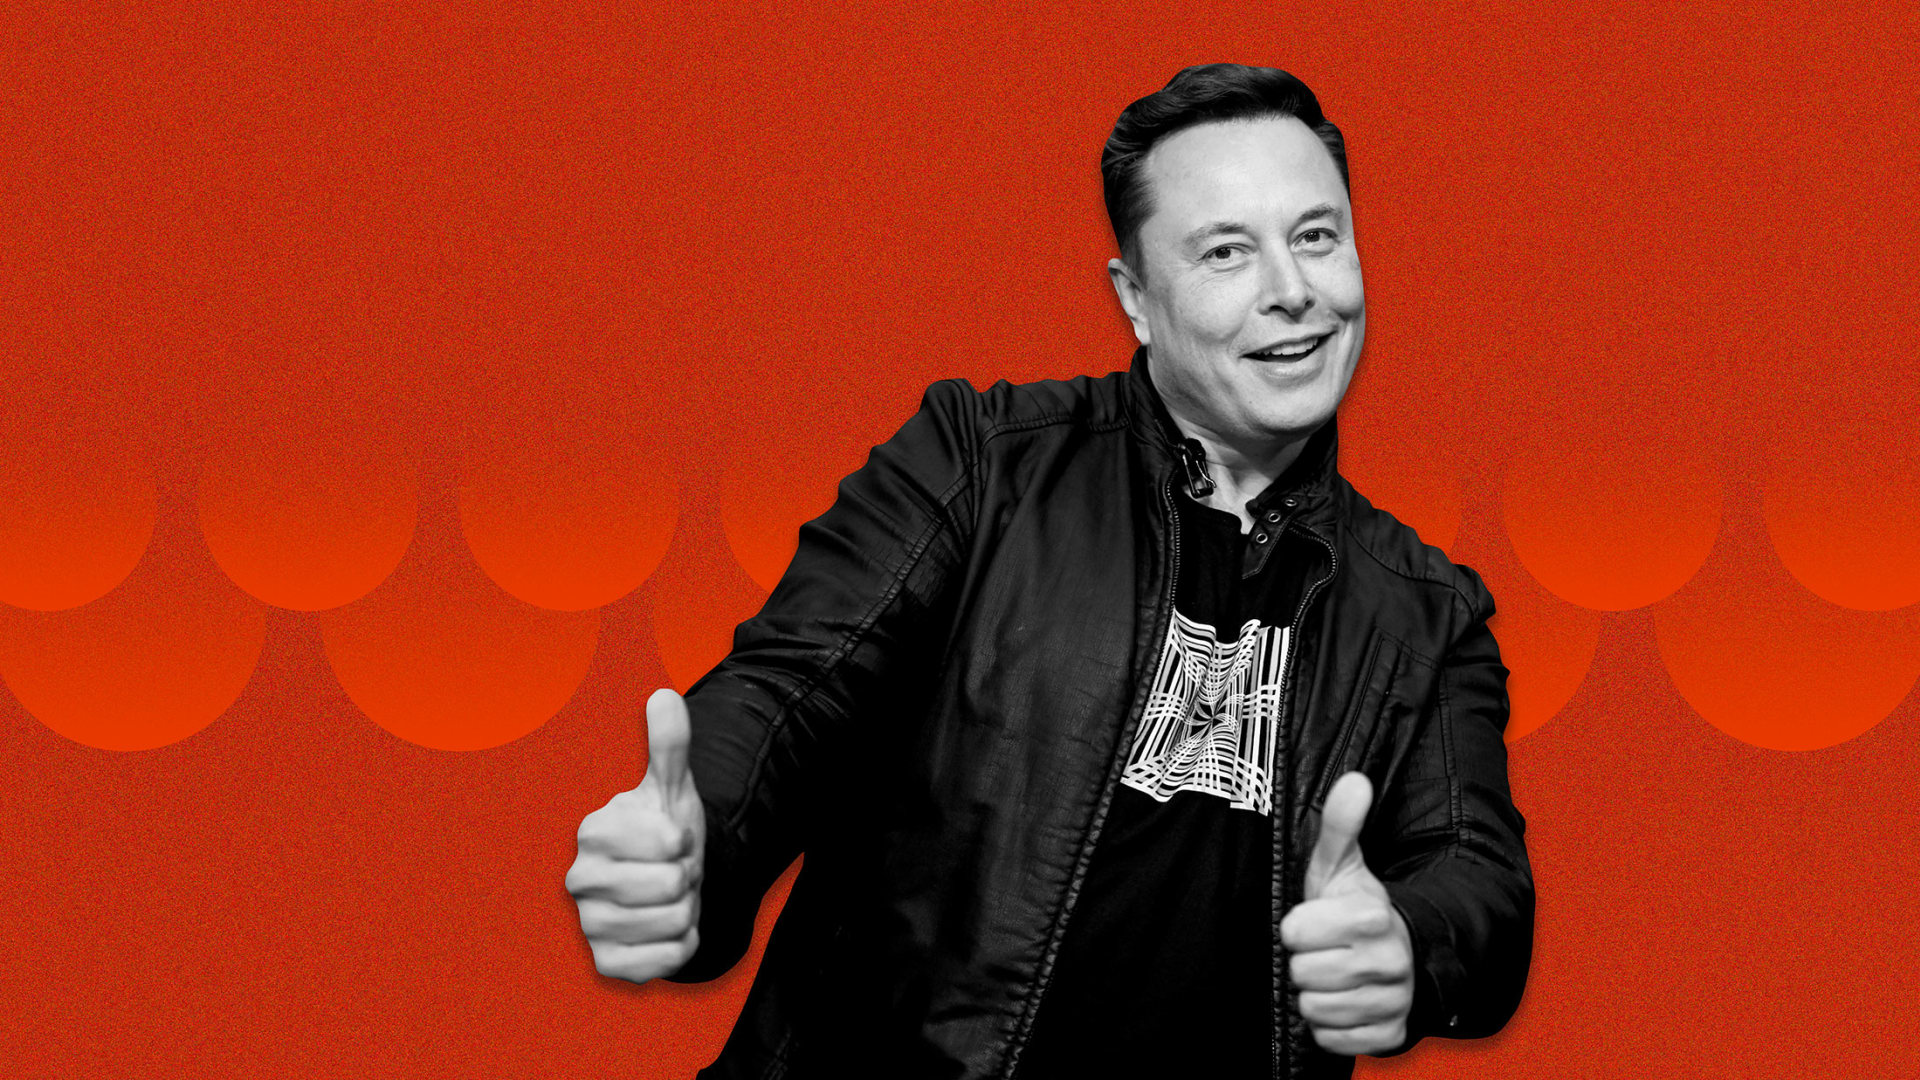 For Elon Musk Bragging Is an Art Form. Why Science Says It's a More Destructive Habit Than You Think